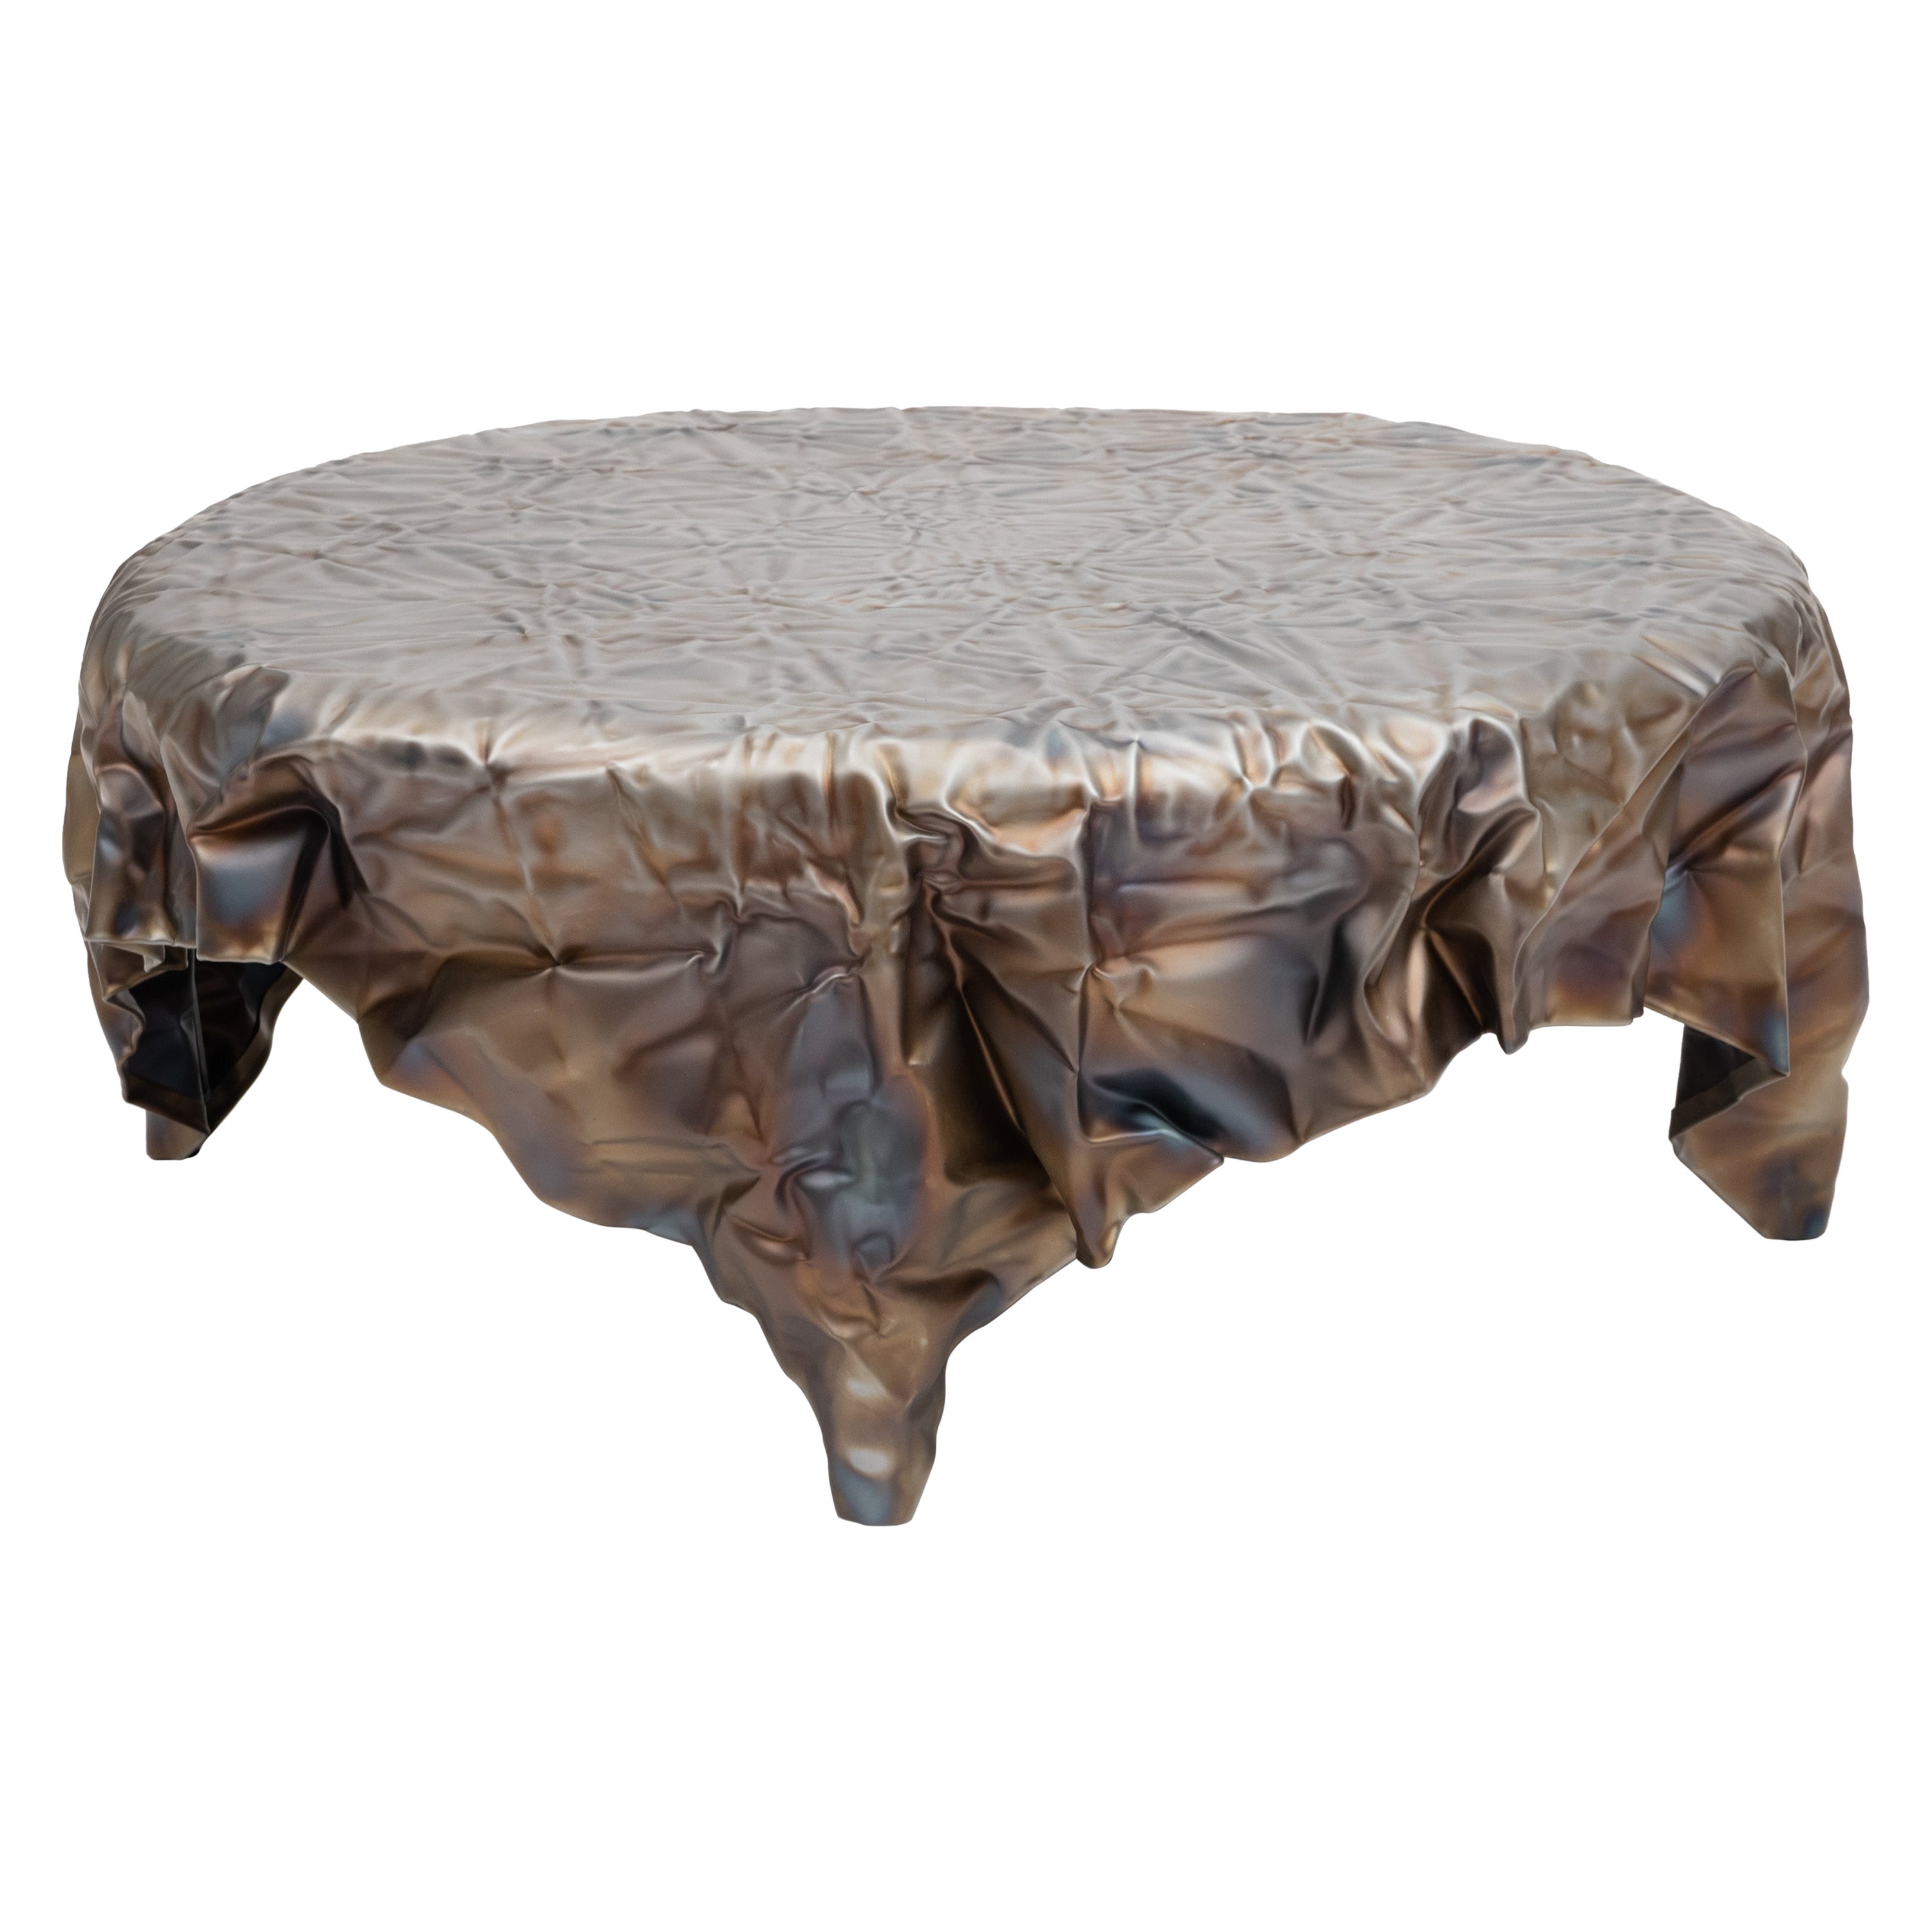 Christopher Prinz “Wrinkled Coffee Table” in a Raw Heat Gradient Finish For Sale